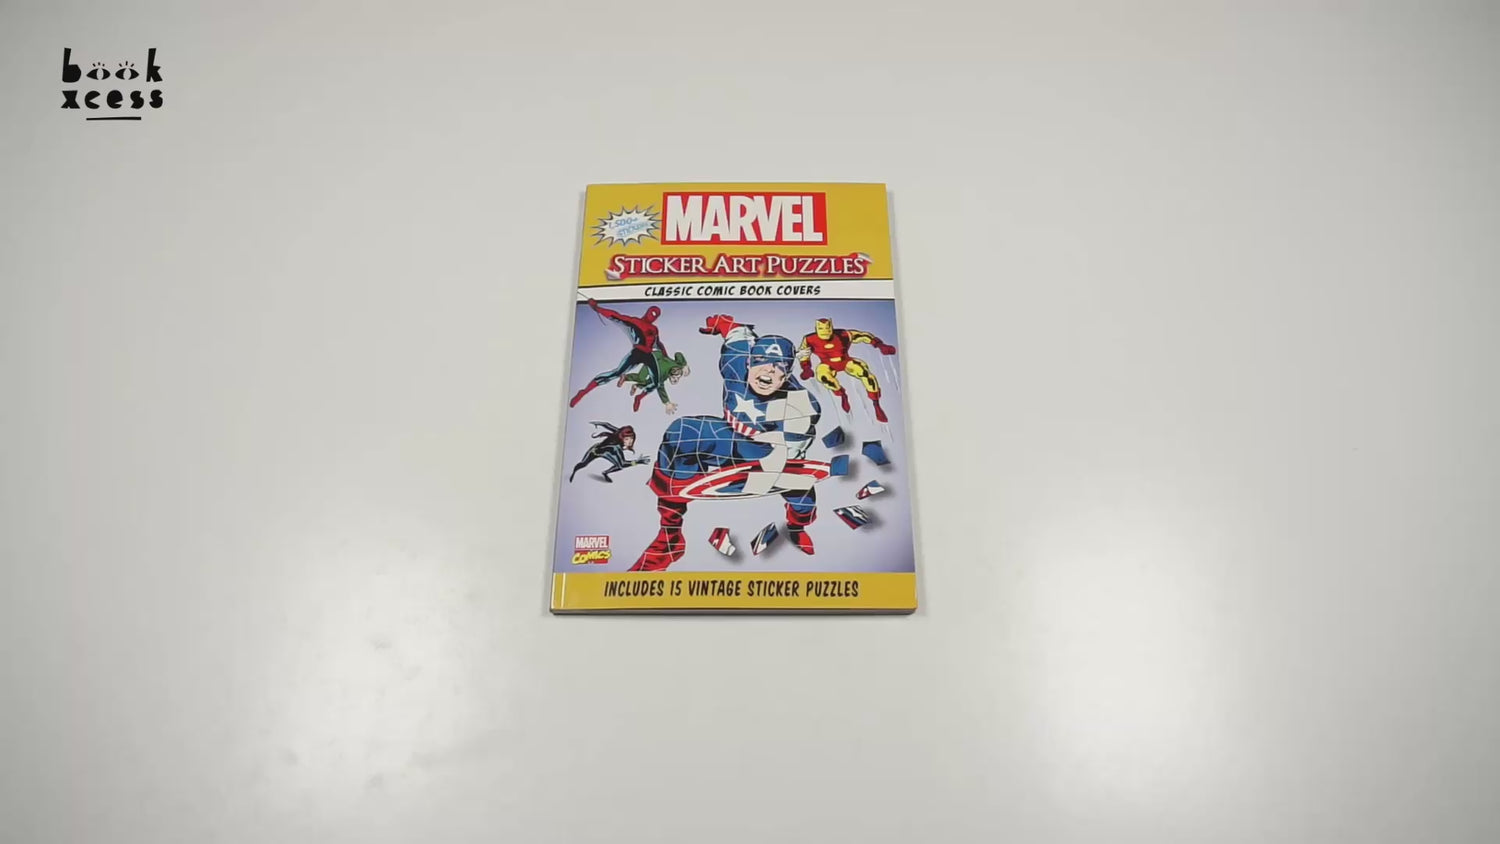 Marvel Sticker Art Puzzles, Book by Editors of Thunder Bay Press, Official Publisher Page